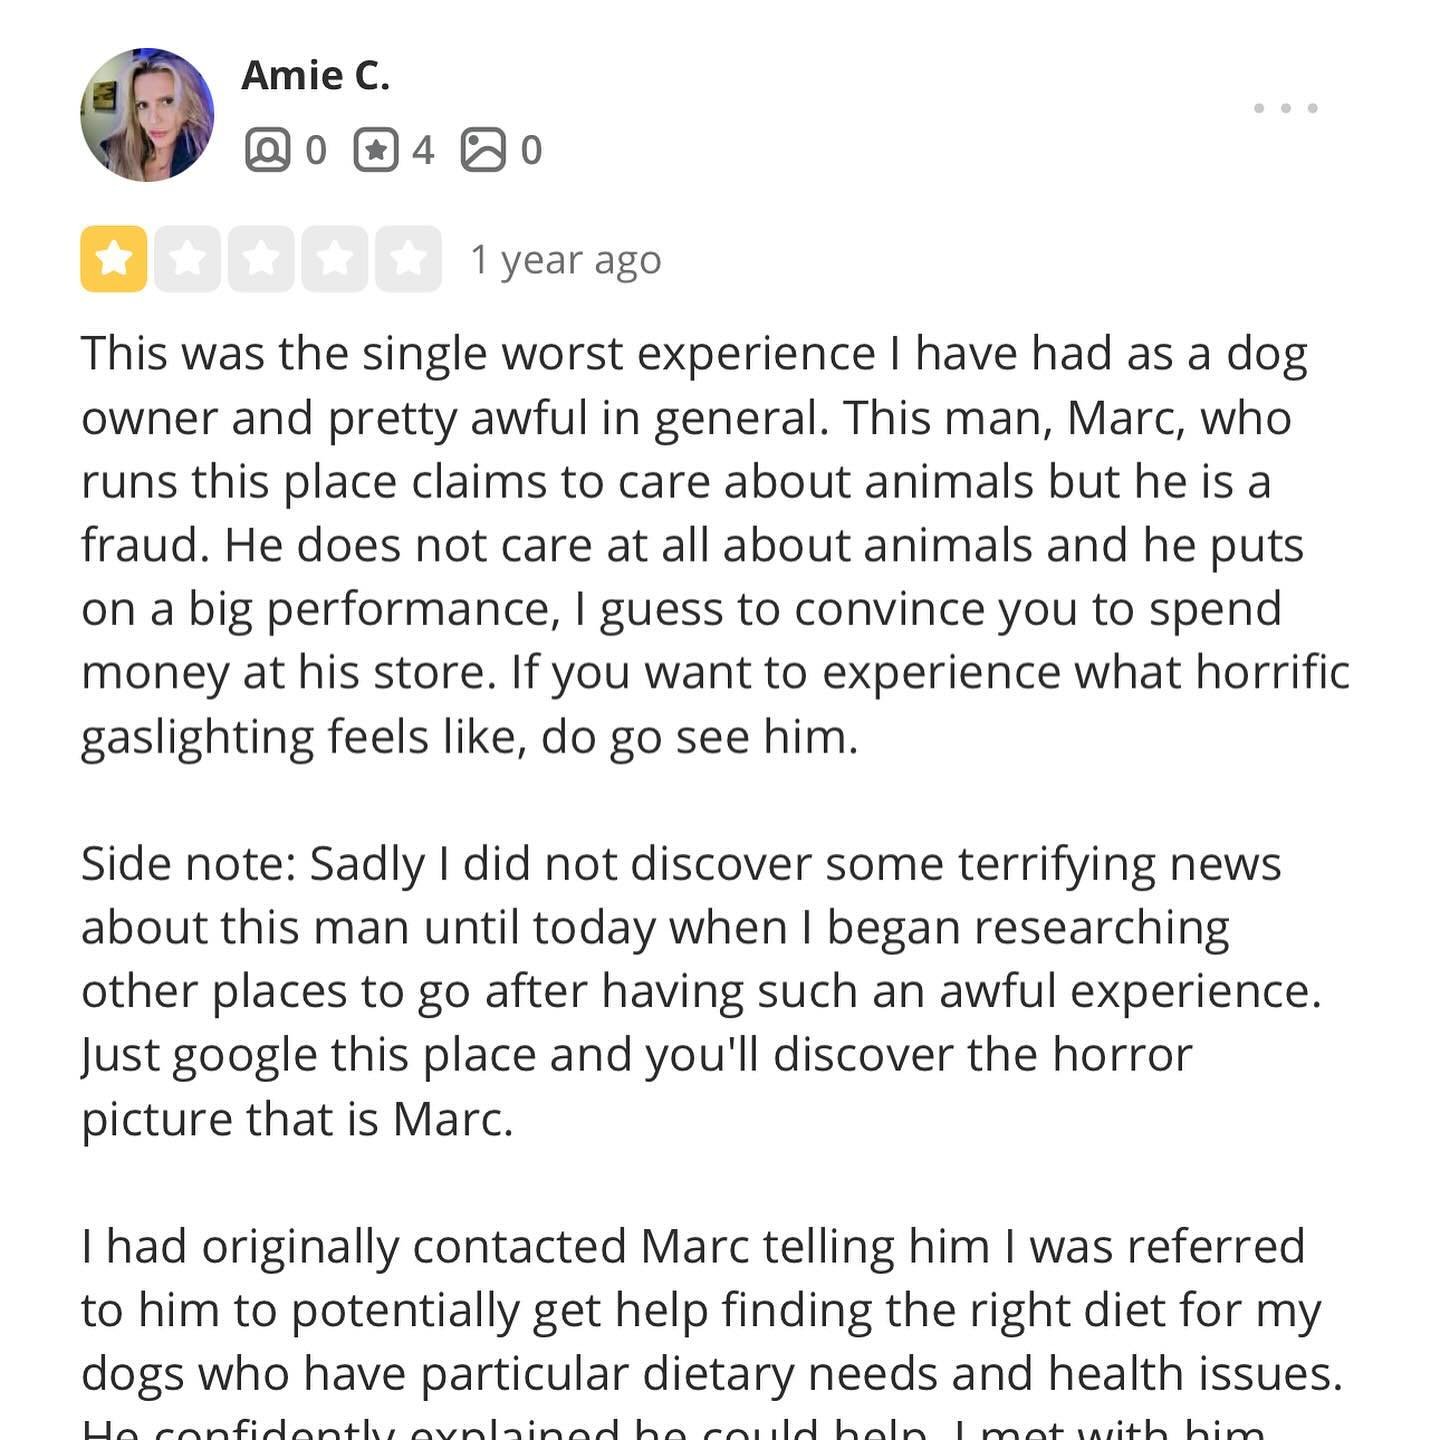 This was less than year ago marc Ching was still acting as a vet and giving medical advise even though he was convicted of doing this !!

Please go to @yelp and add you complain !!